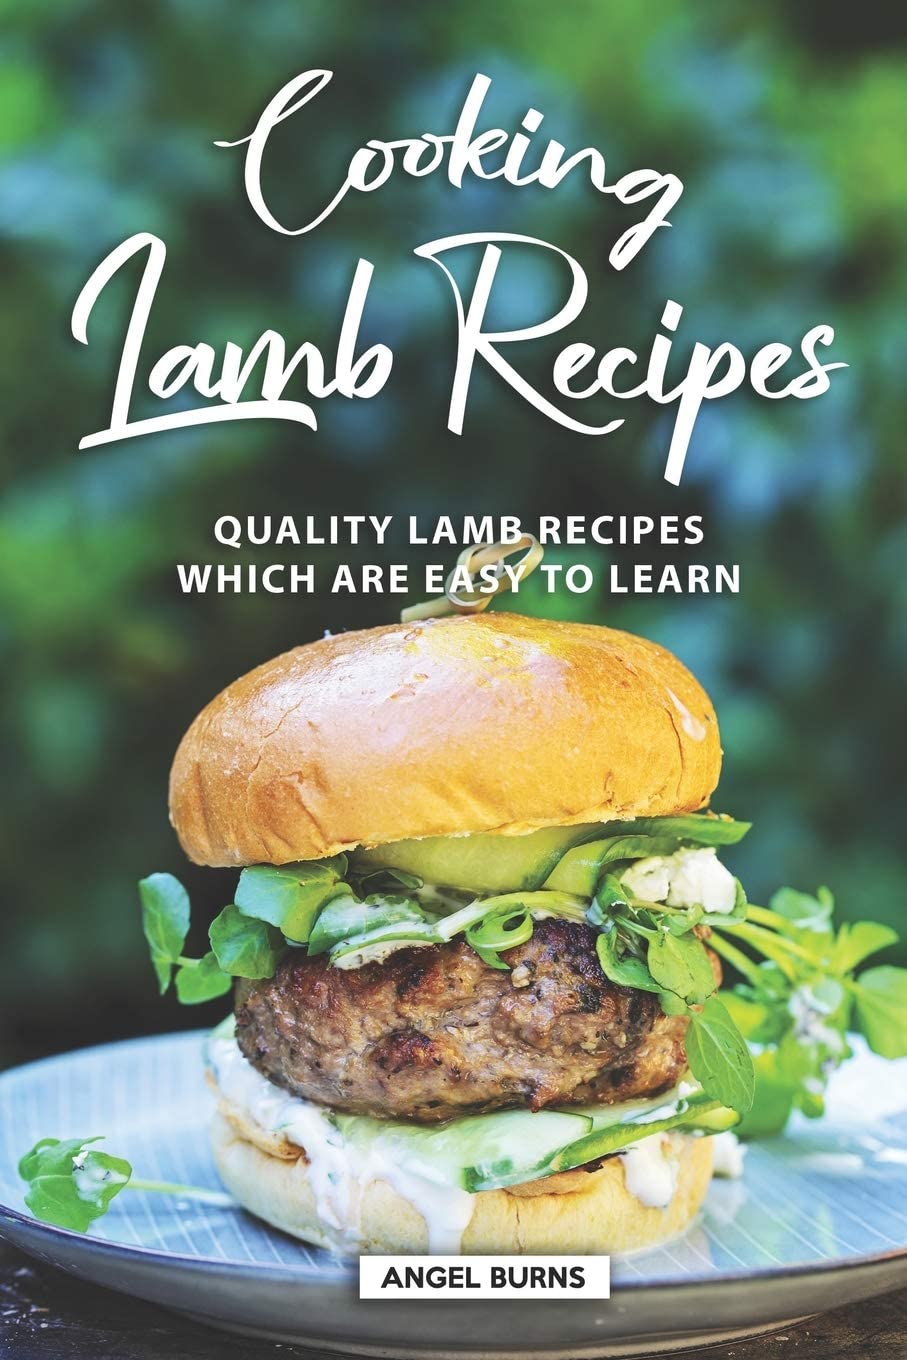 Cooking Lamb Recipes: Quality Lamb Recipes Which Are Easy to Learn